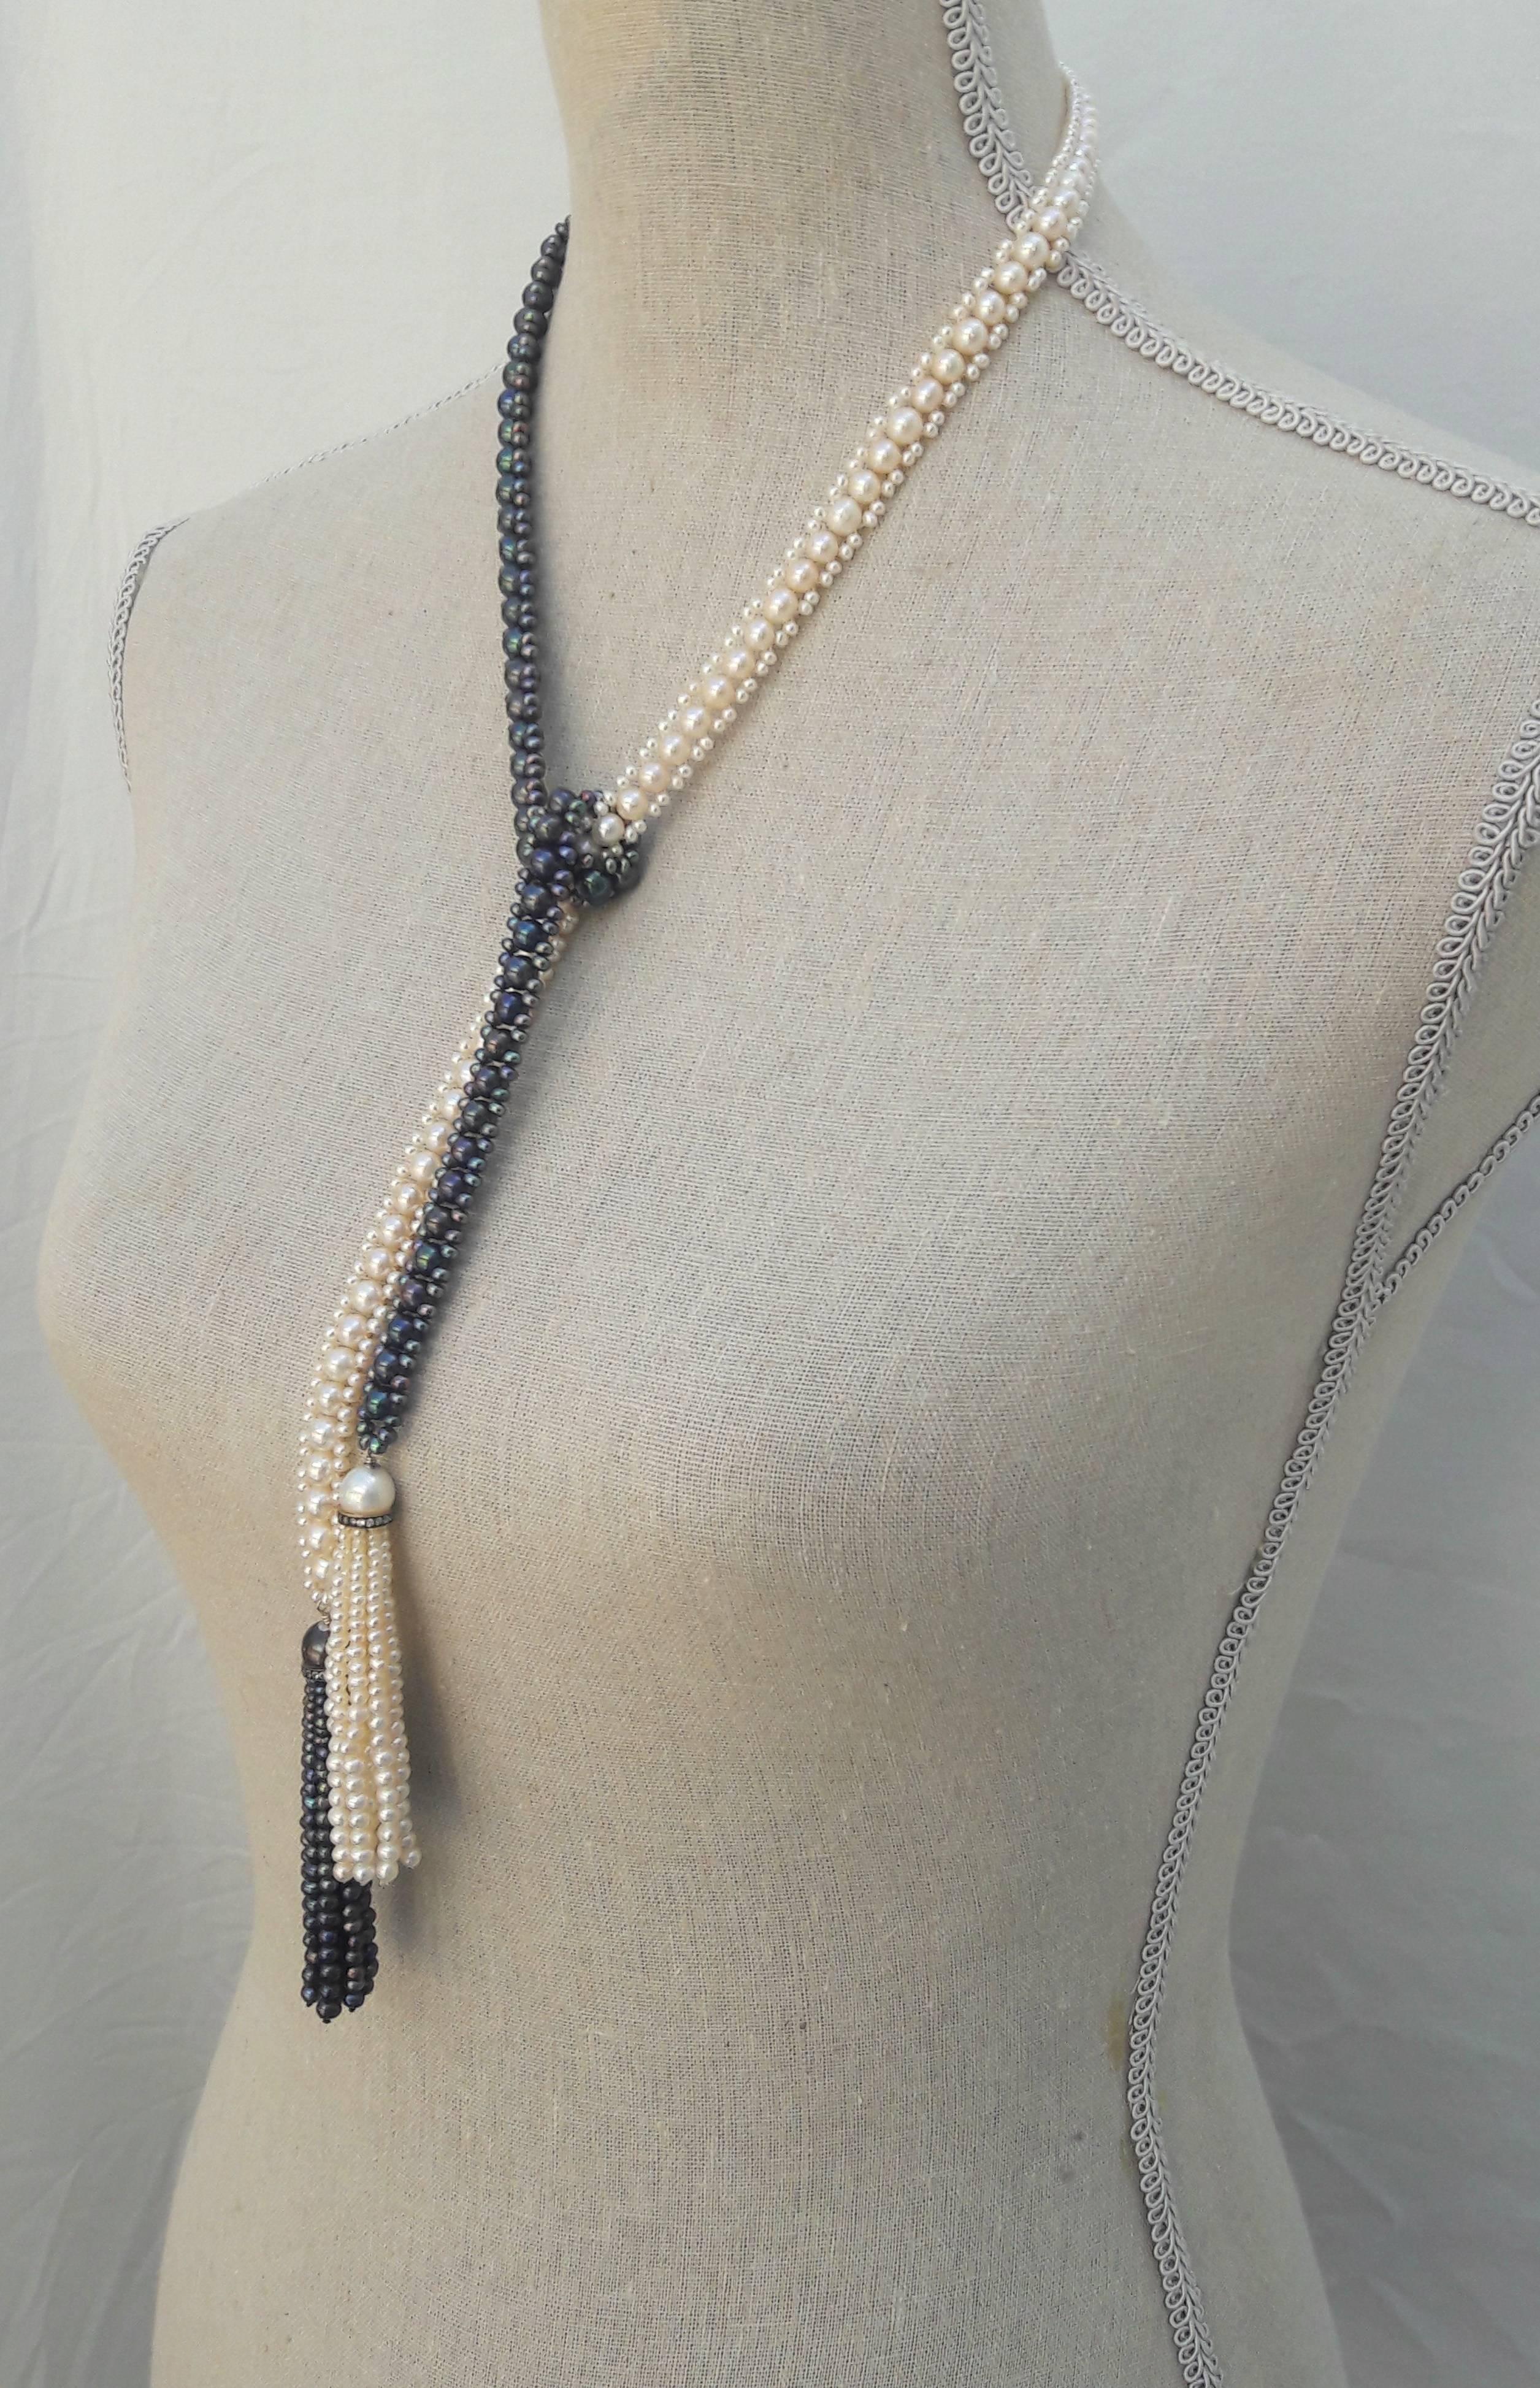 Marina J. Long Woven Black and White Pearl Sautoir Necklace in Art Deco Style  2